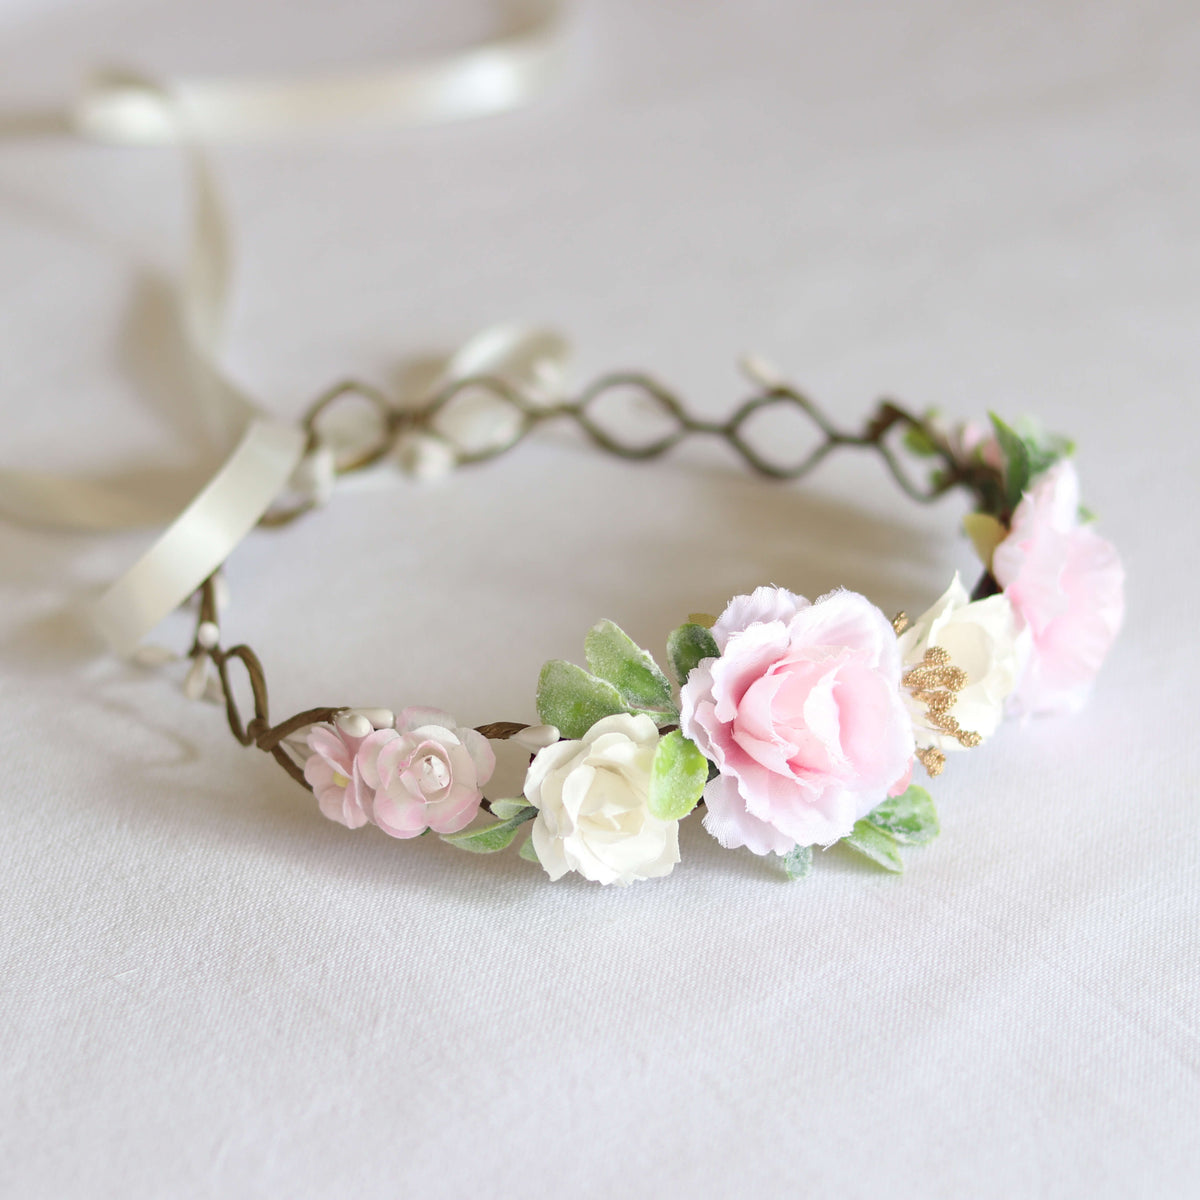 Amelie light blush and ivory flower crown shown from the side. Matches our Sophia flower girl dress.